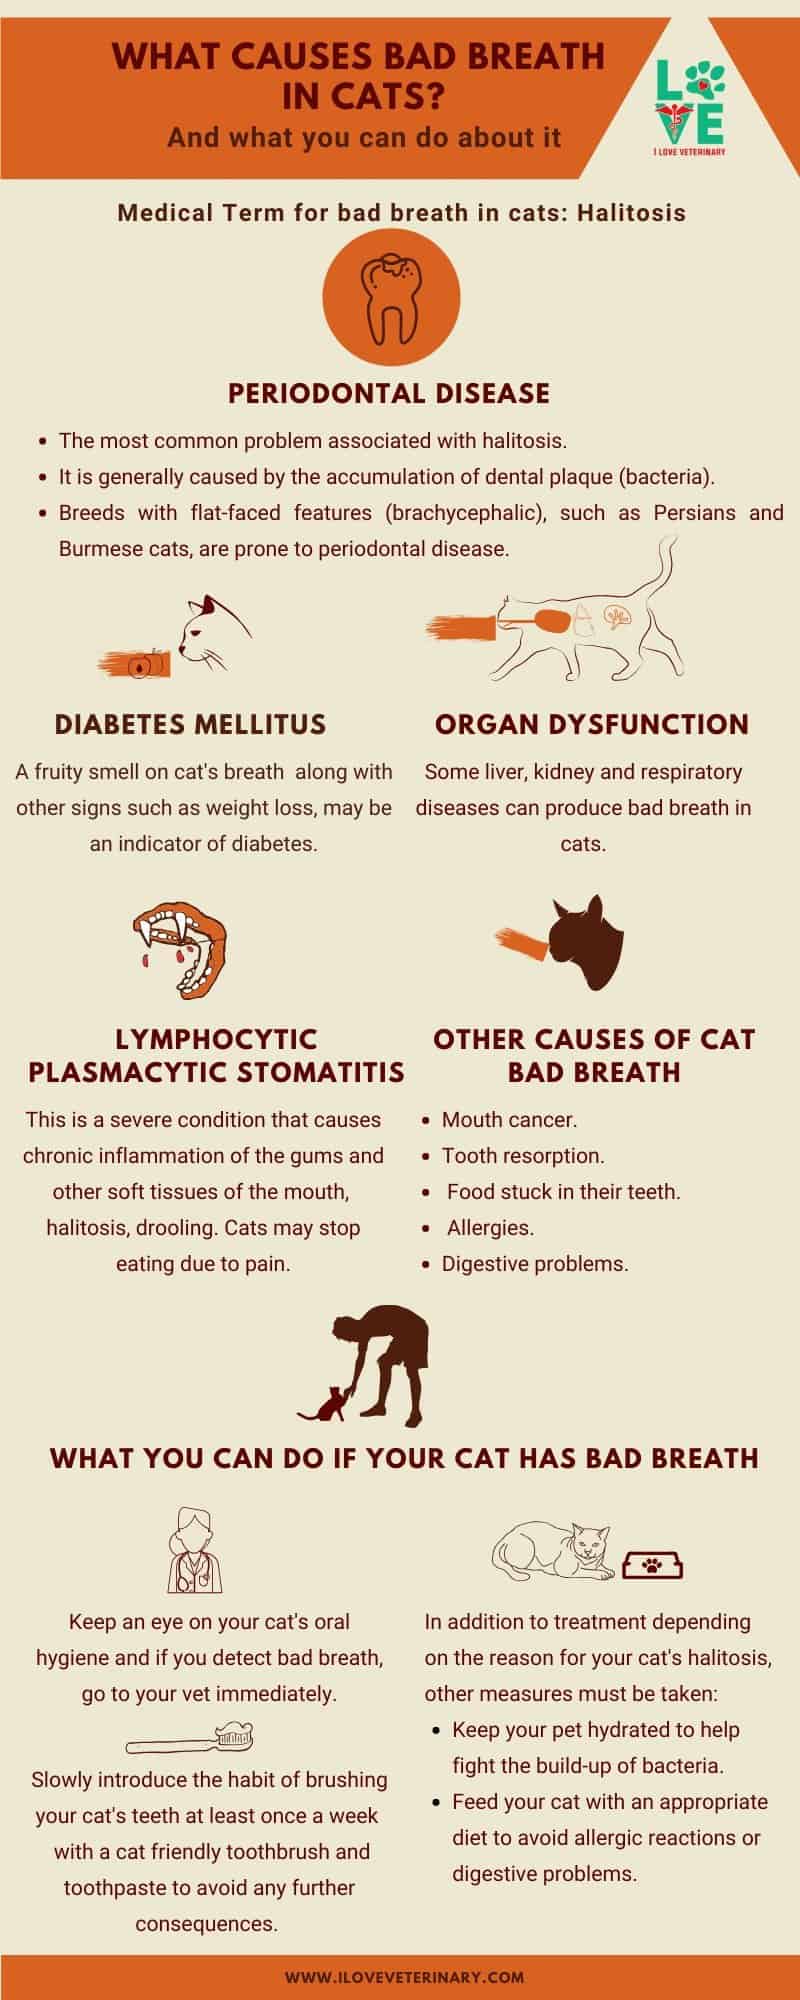 What causes bad breath in cats infographic